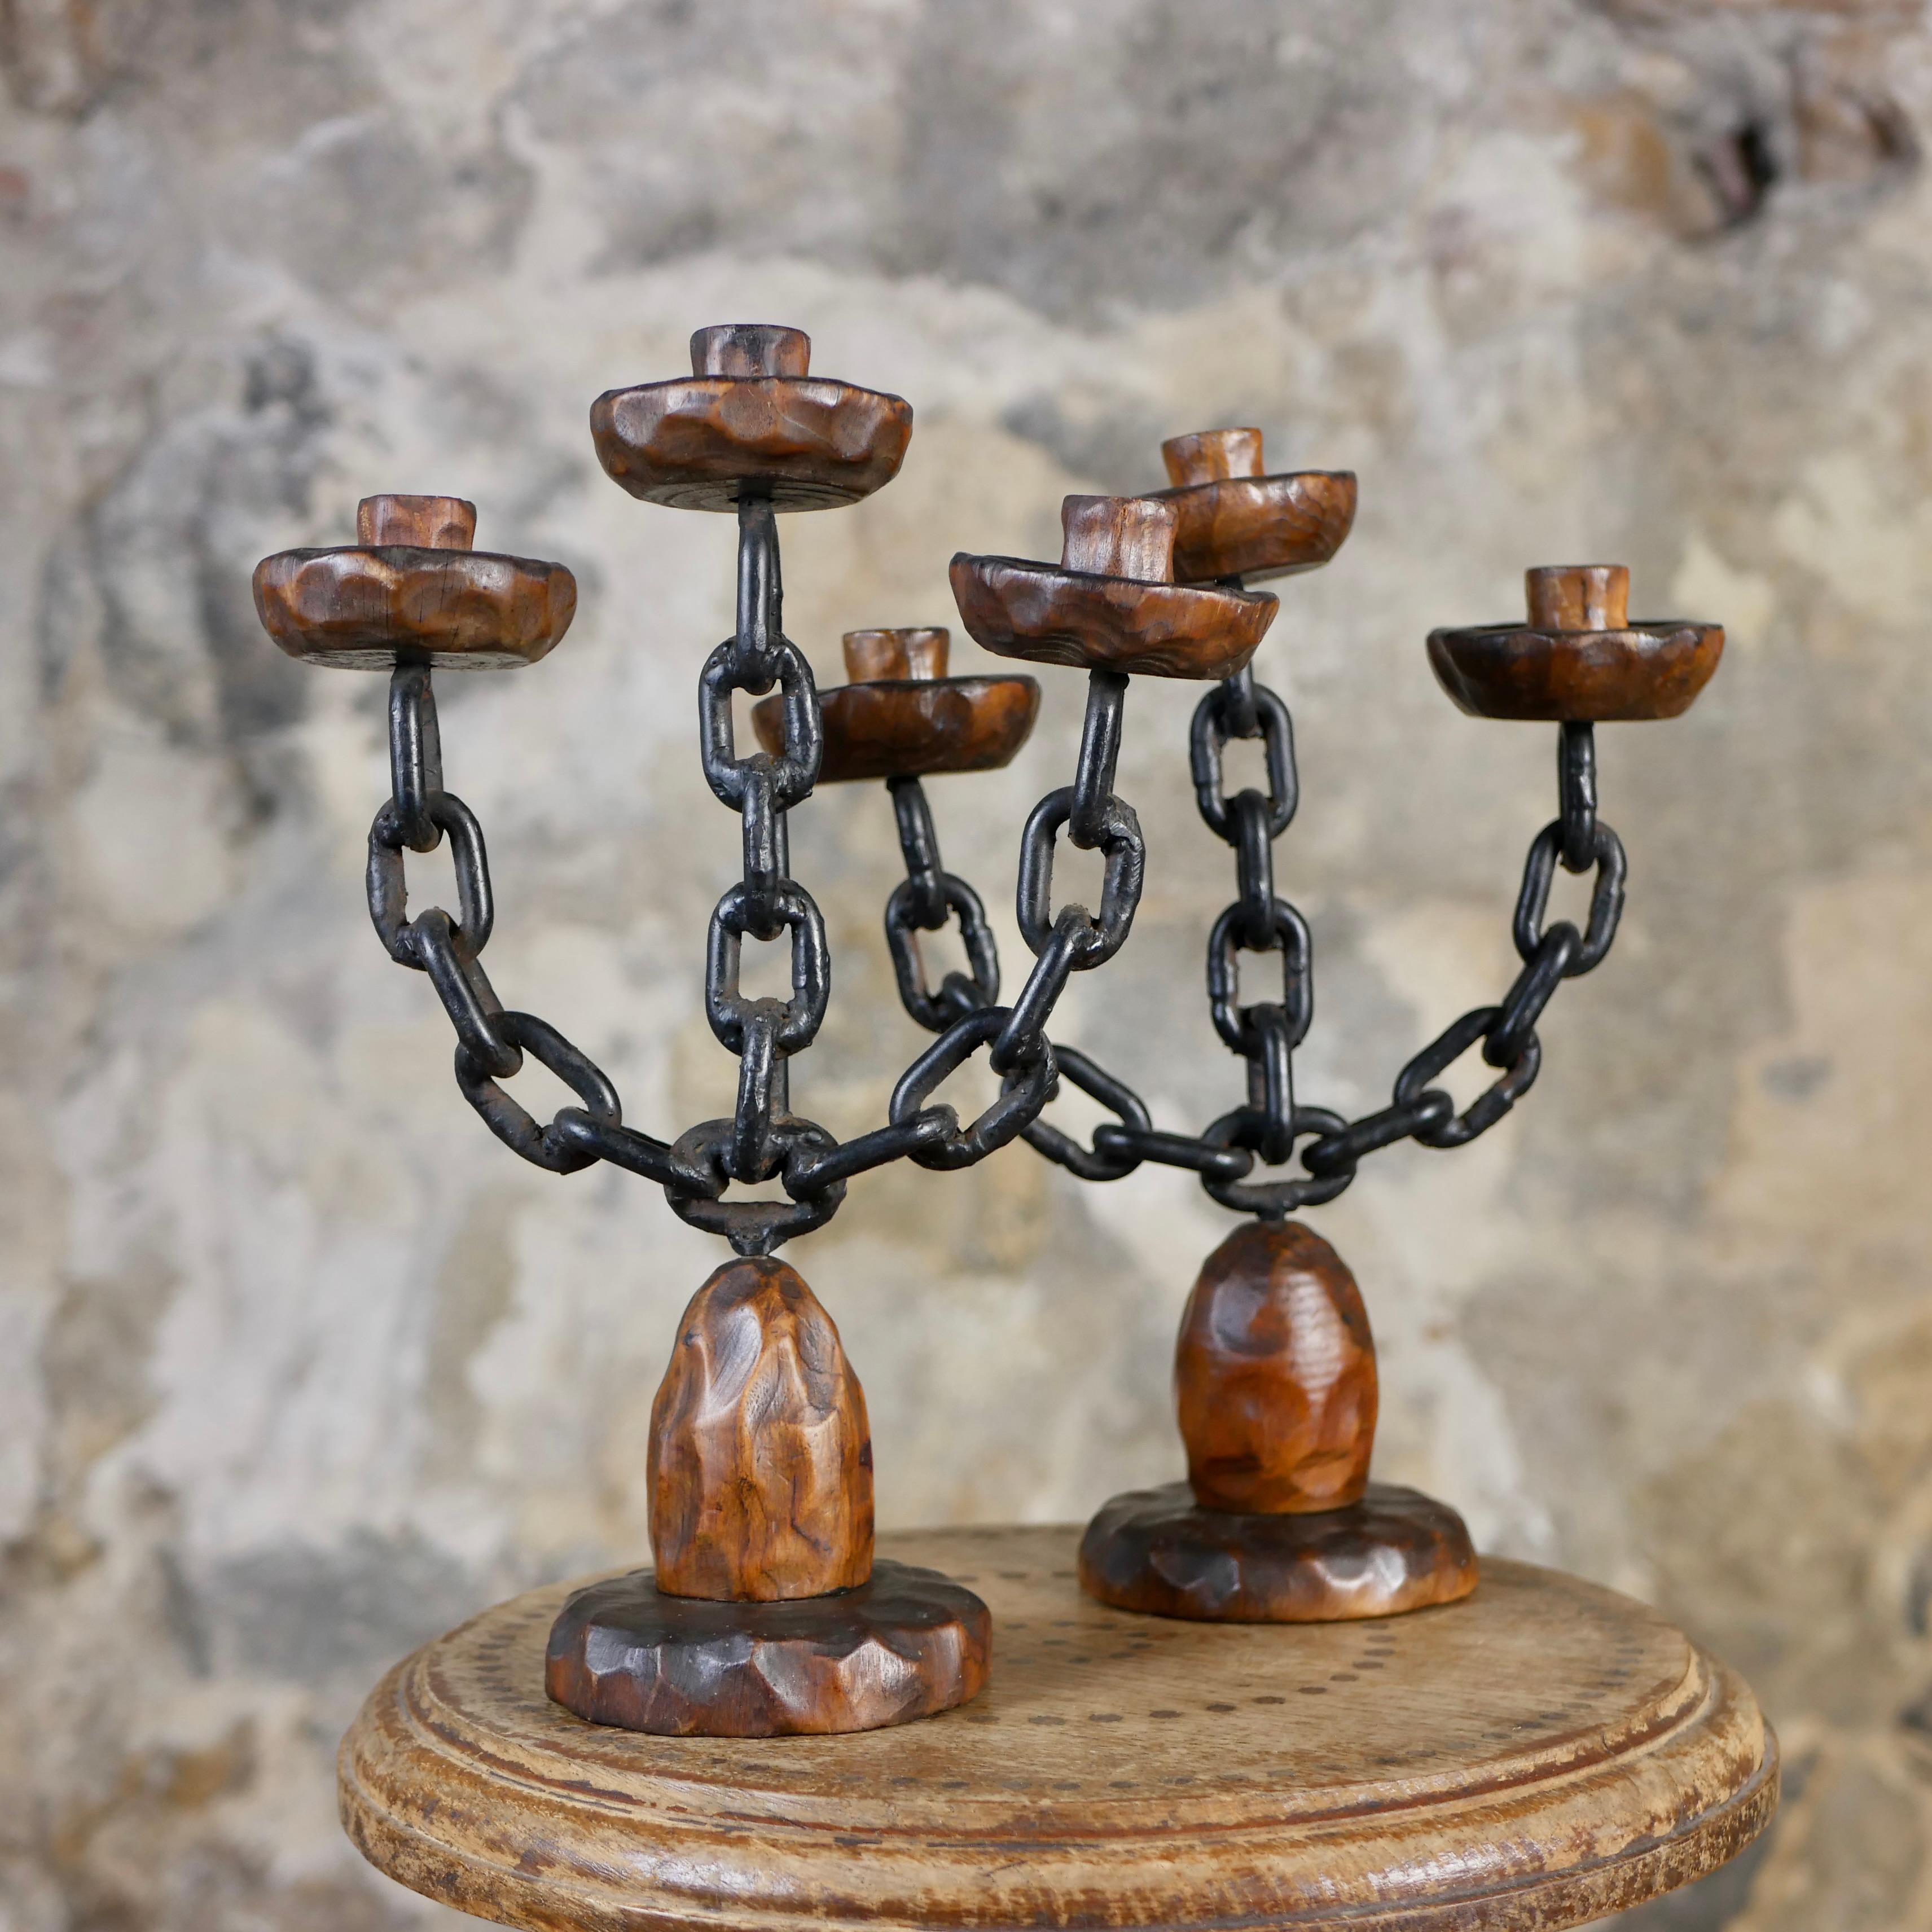 Adorable pair of brutalist candlesticks made in Spain in the 1970s, in wrought iron chains and wood, for 3 candles.
Overall good condition, traces of use.
Dimensions : H32, D11, W26